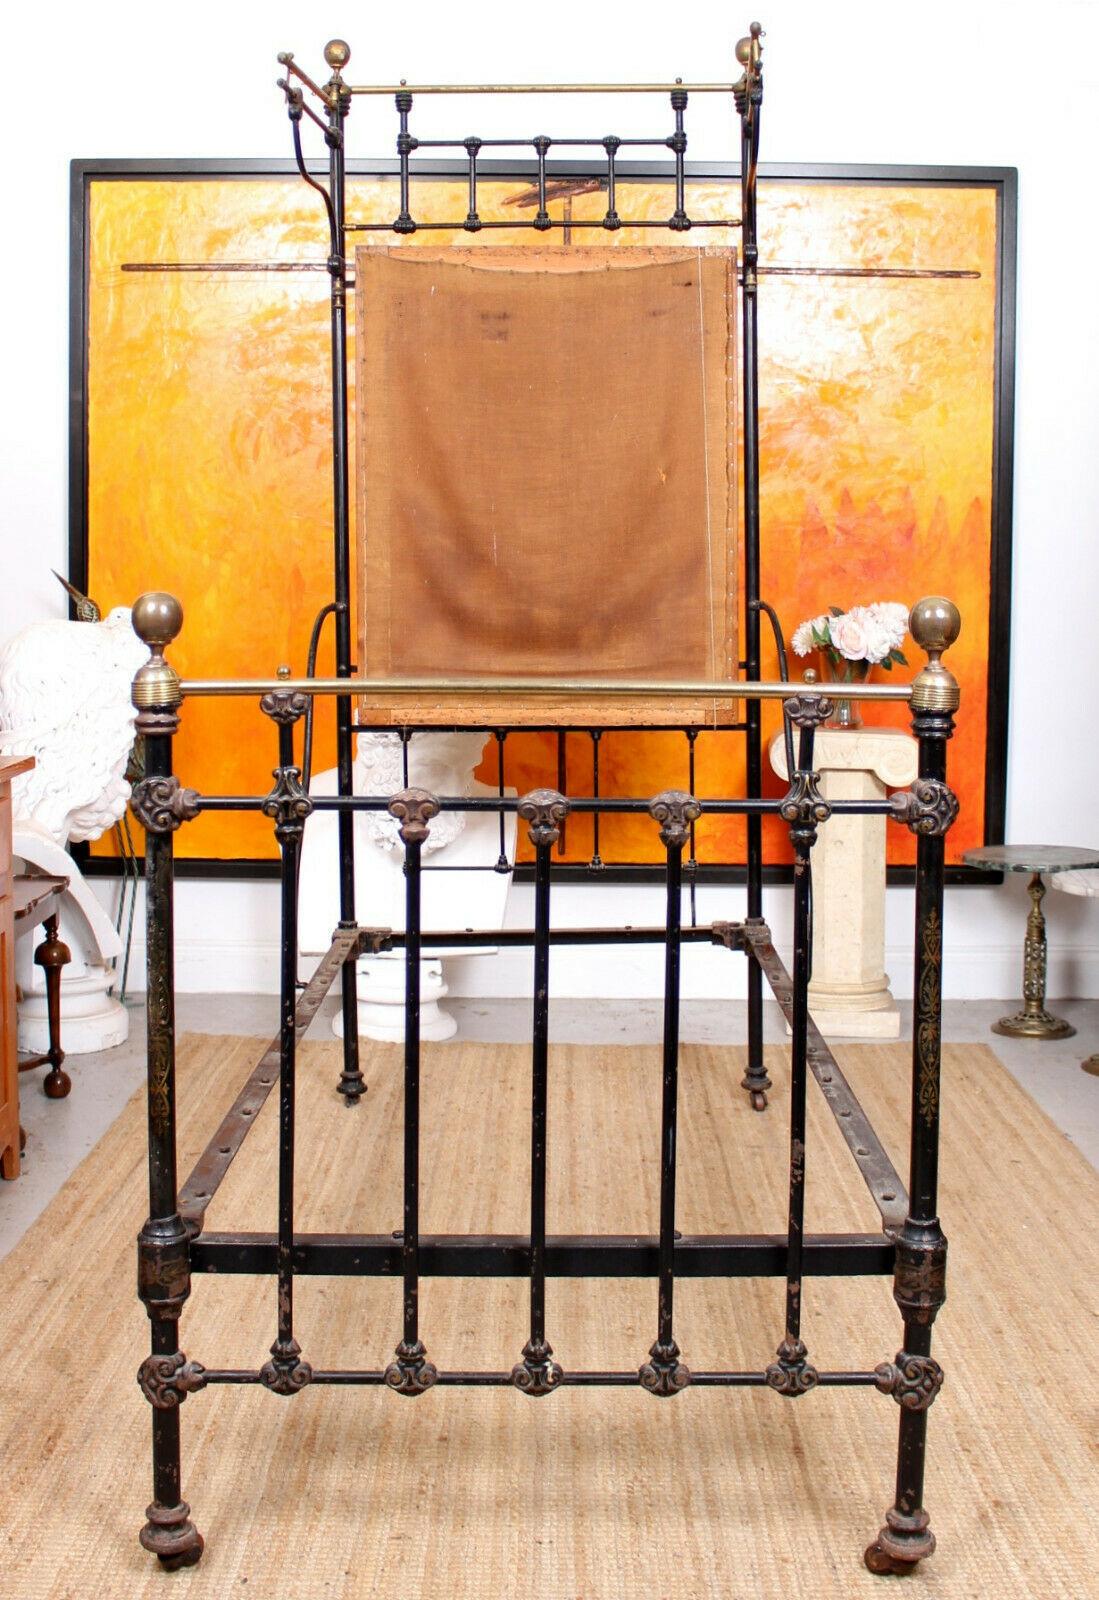 English Cast Iron Bed Frame Brass Victorian 19th Century Bedframe For Sale